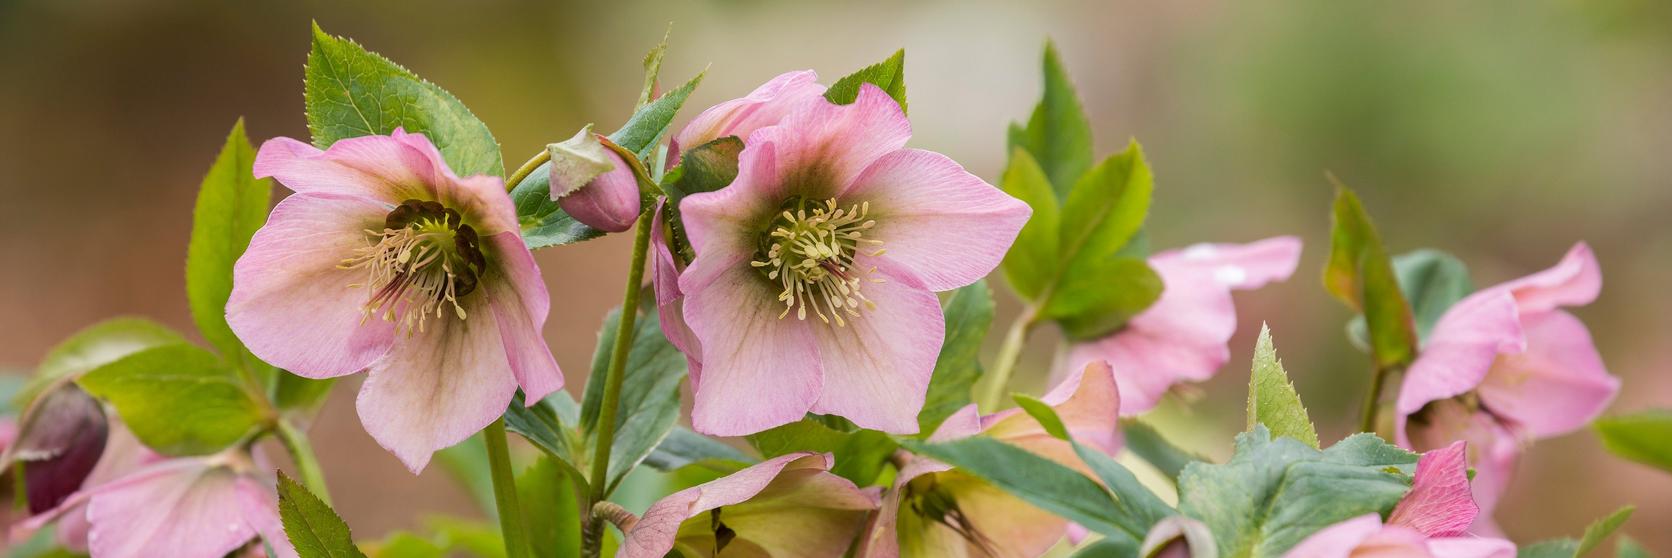 Group_of_light_pink_hellebores_with_green_background